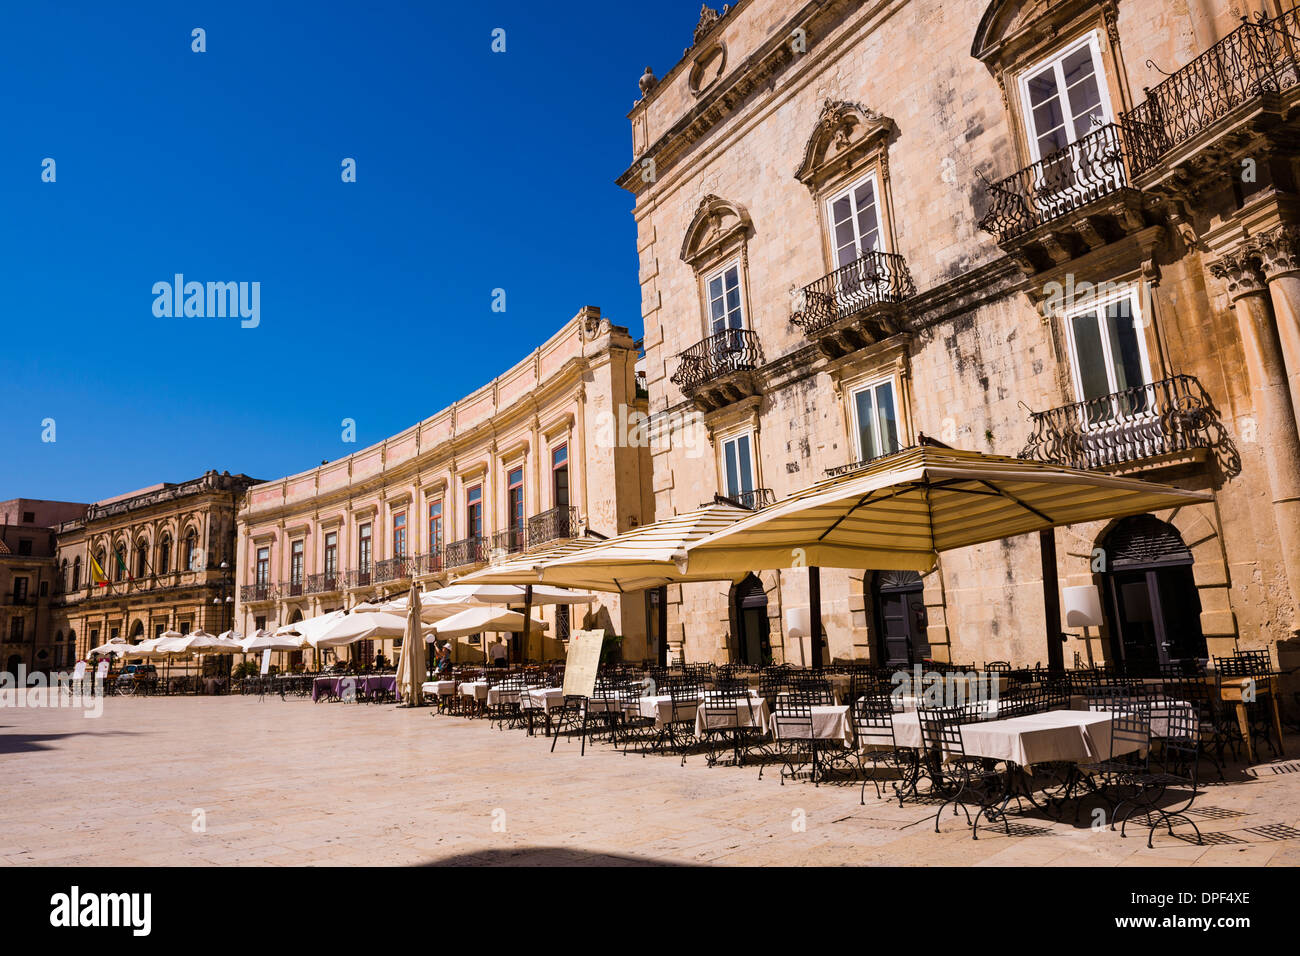 Cafes in Sicilian Baroque style buildings in Piazza Duomo, Ortigia, Syracuse (Siracusa), Sicily, Italy, Europe Stock Photo